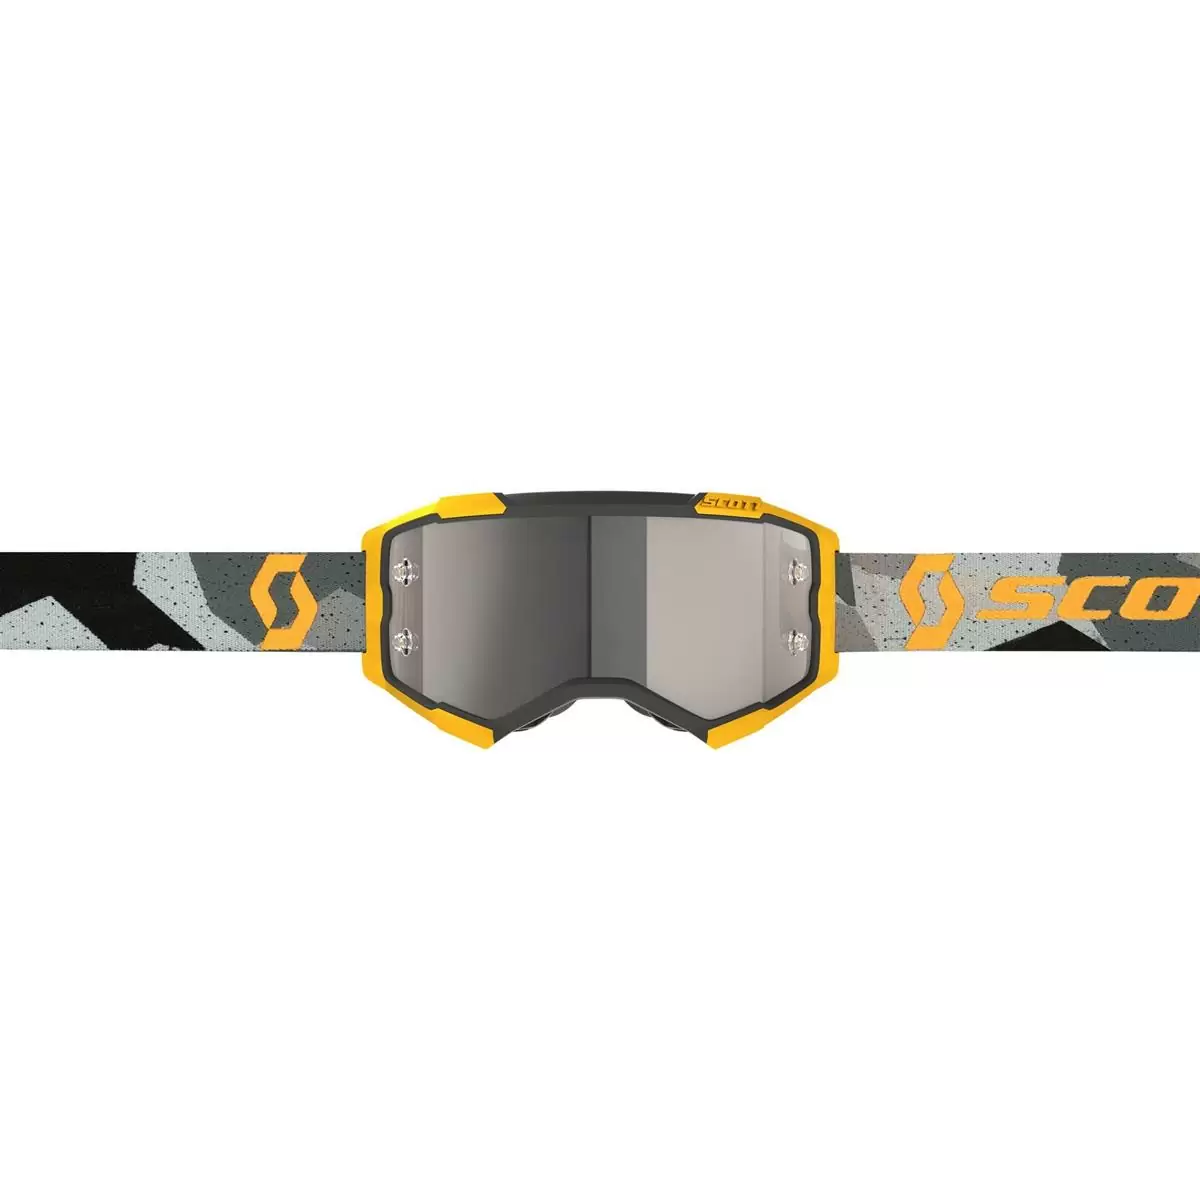 Fury goggle Yellow/Grey Silver Chrome Works Lens #1